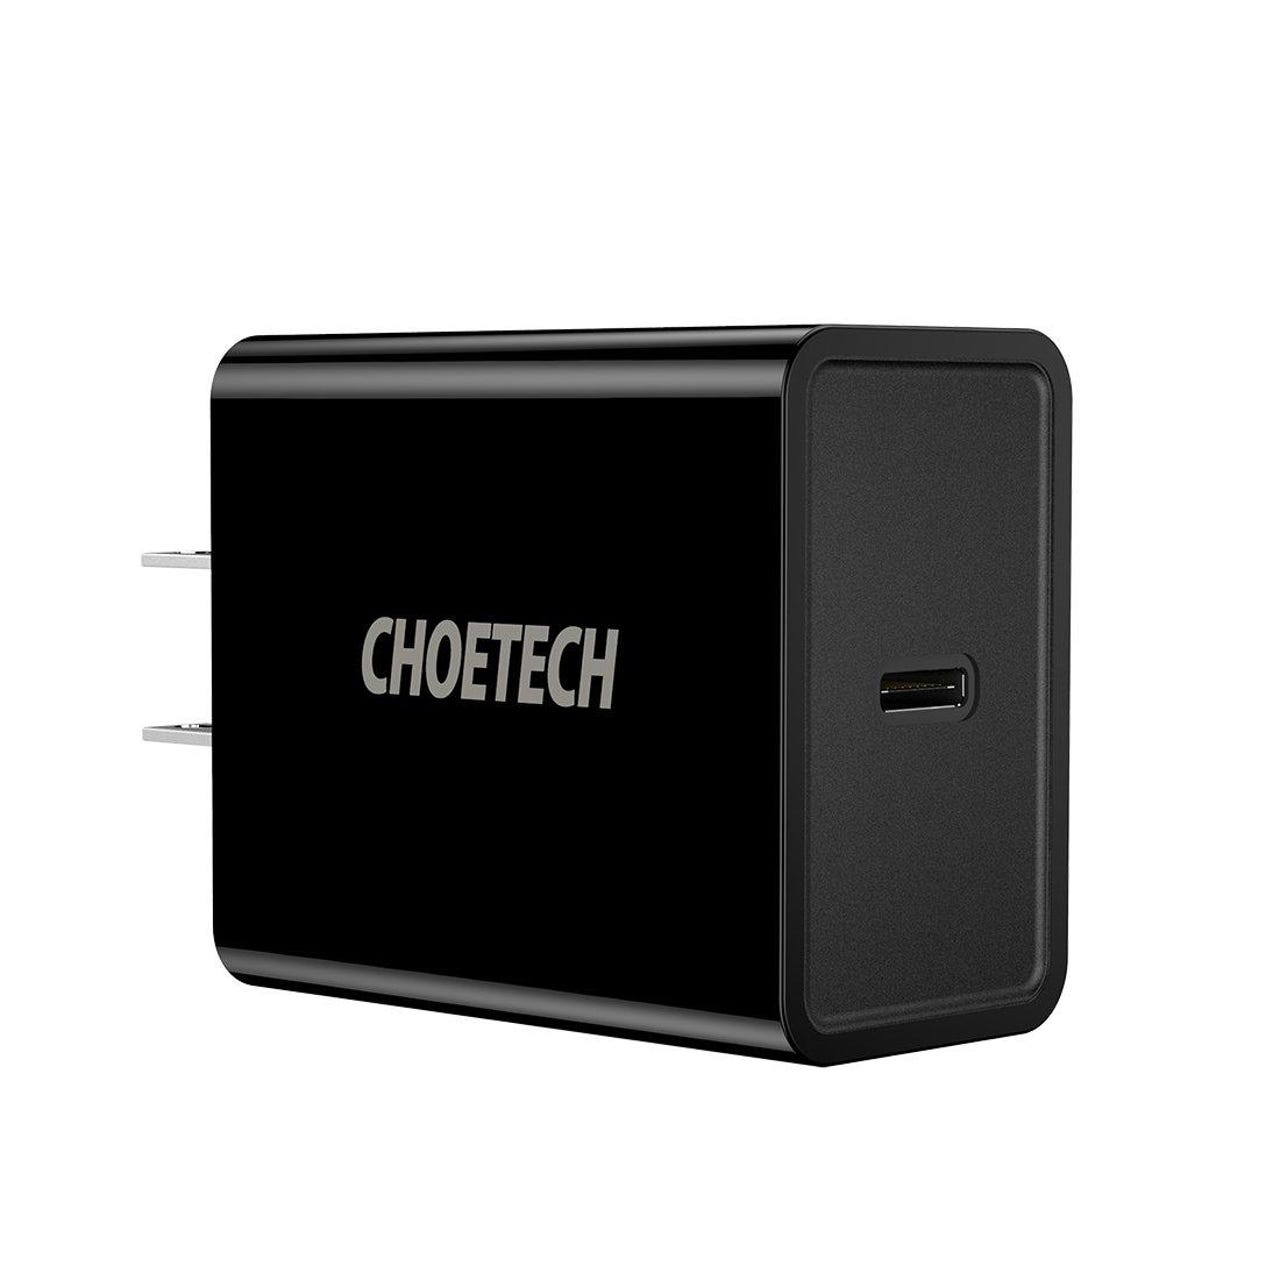 CHOETECH USB C Charger, 18W Type-C Power Delivery